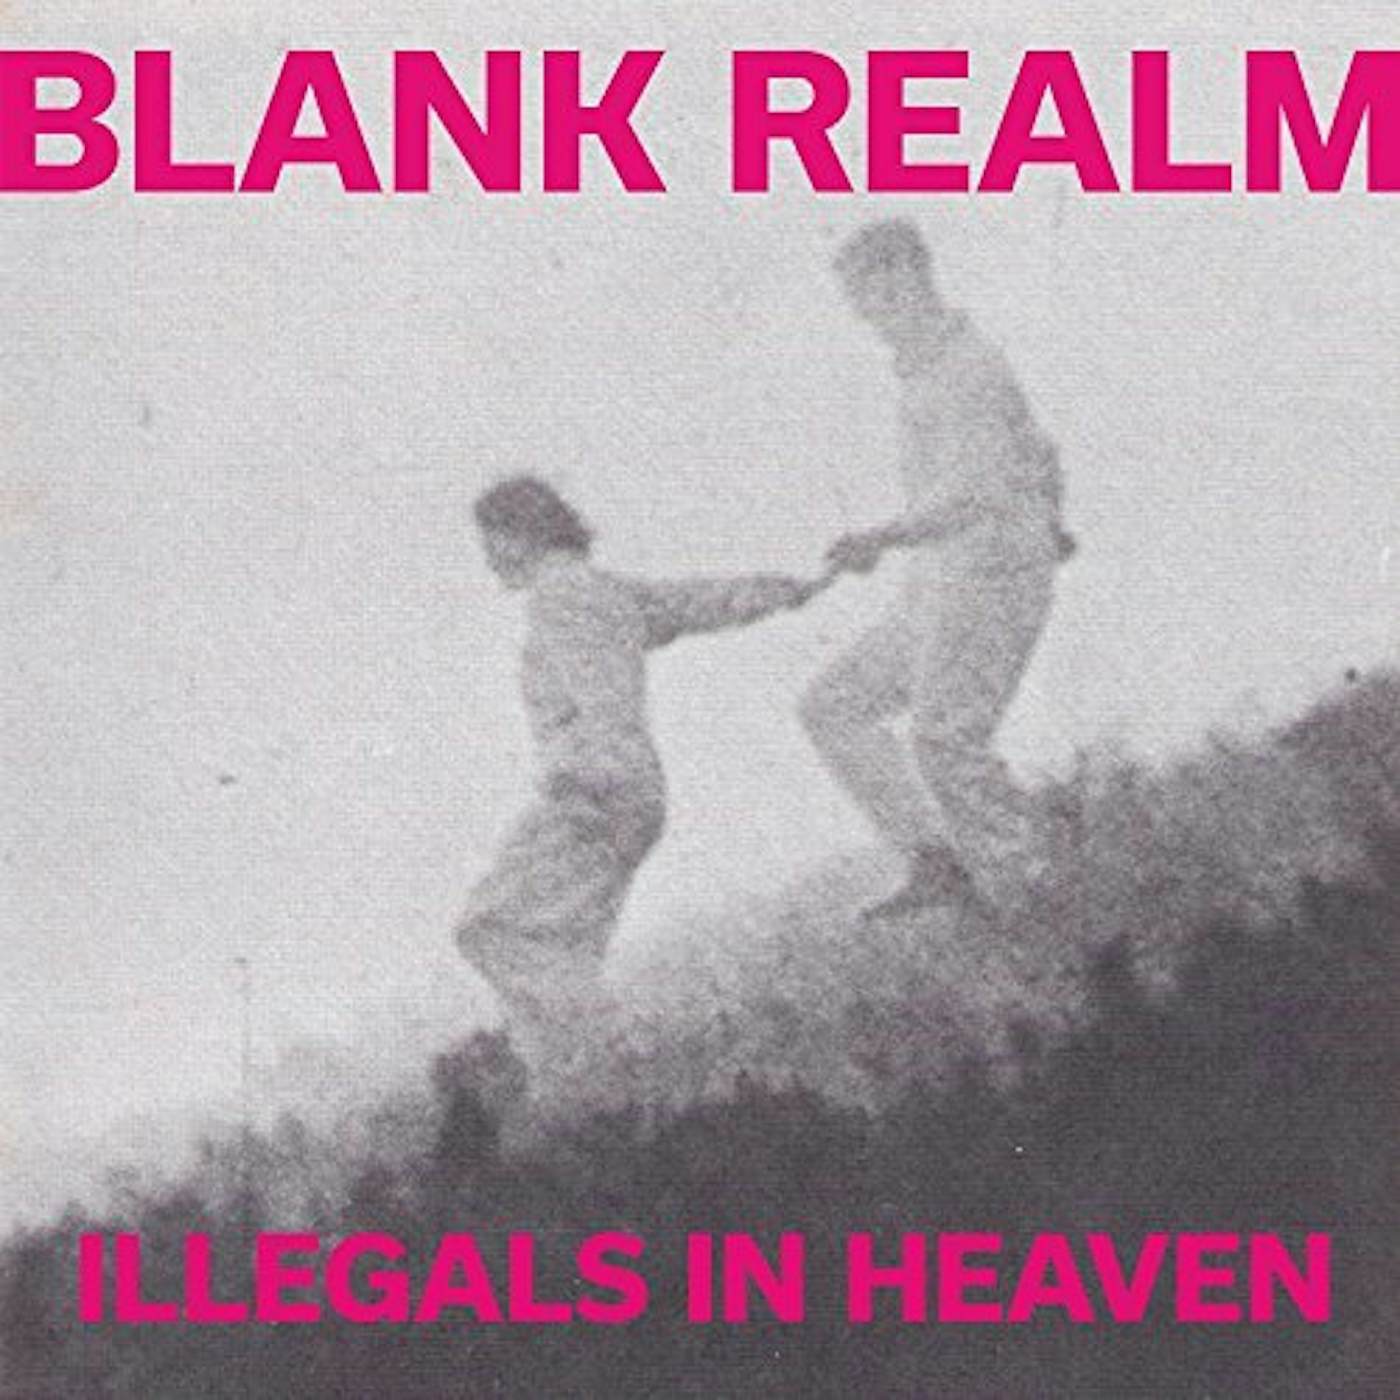 Blank Realm ILLEGALS IN HEAVEN CD